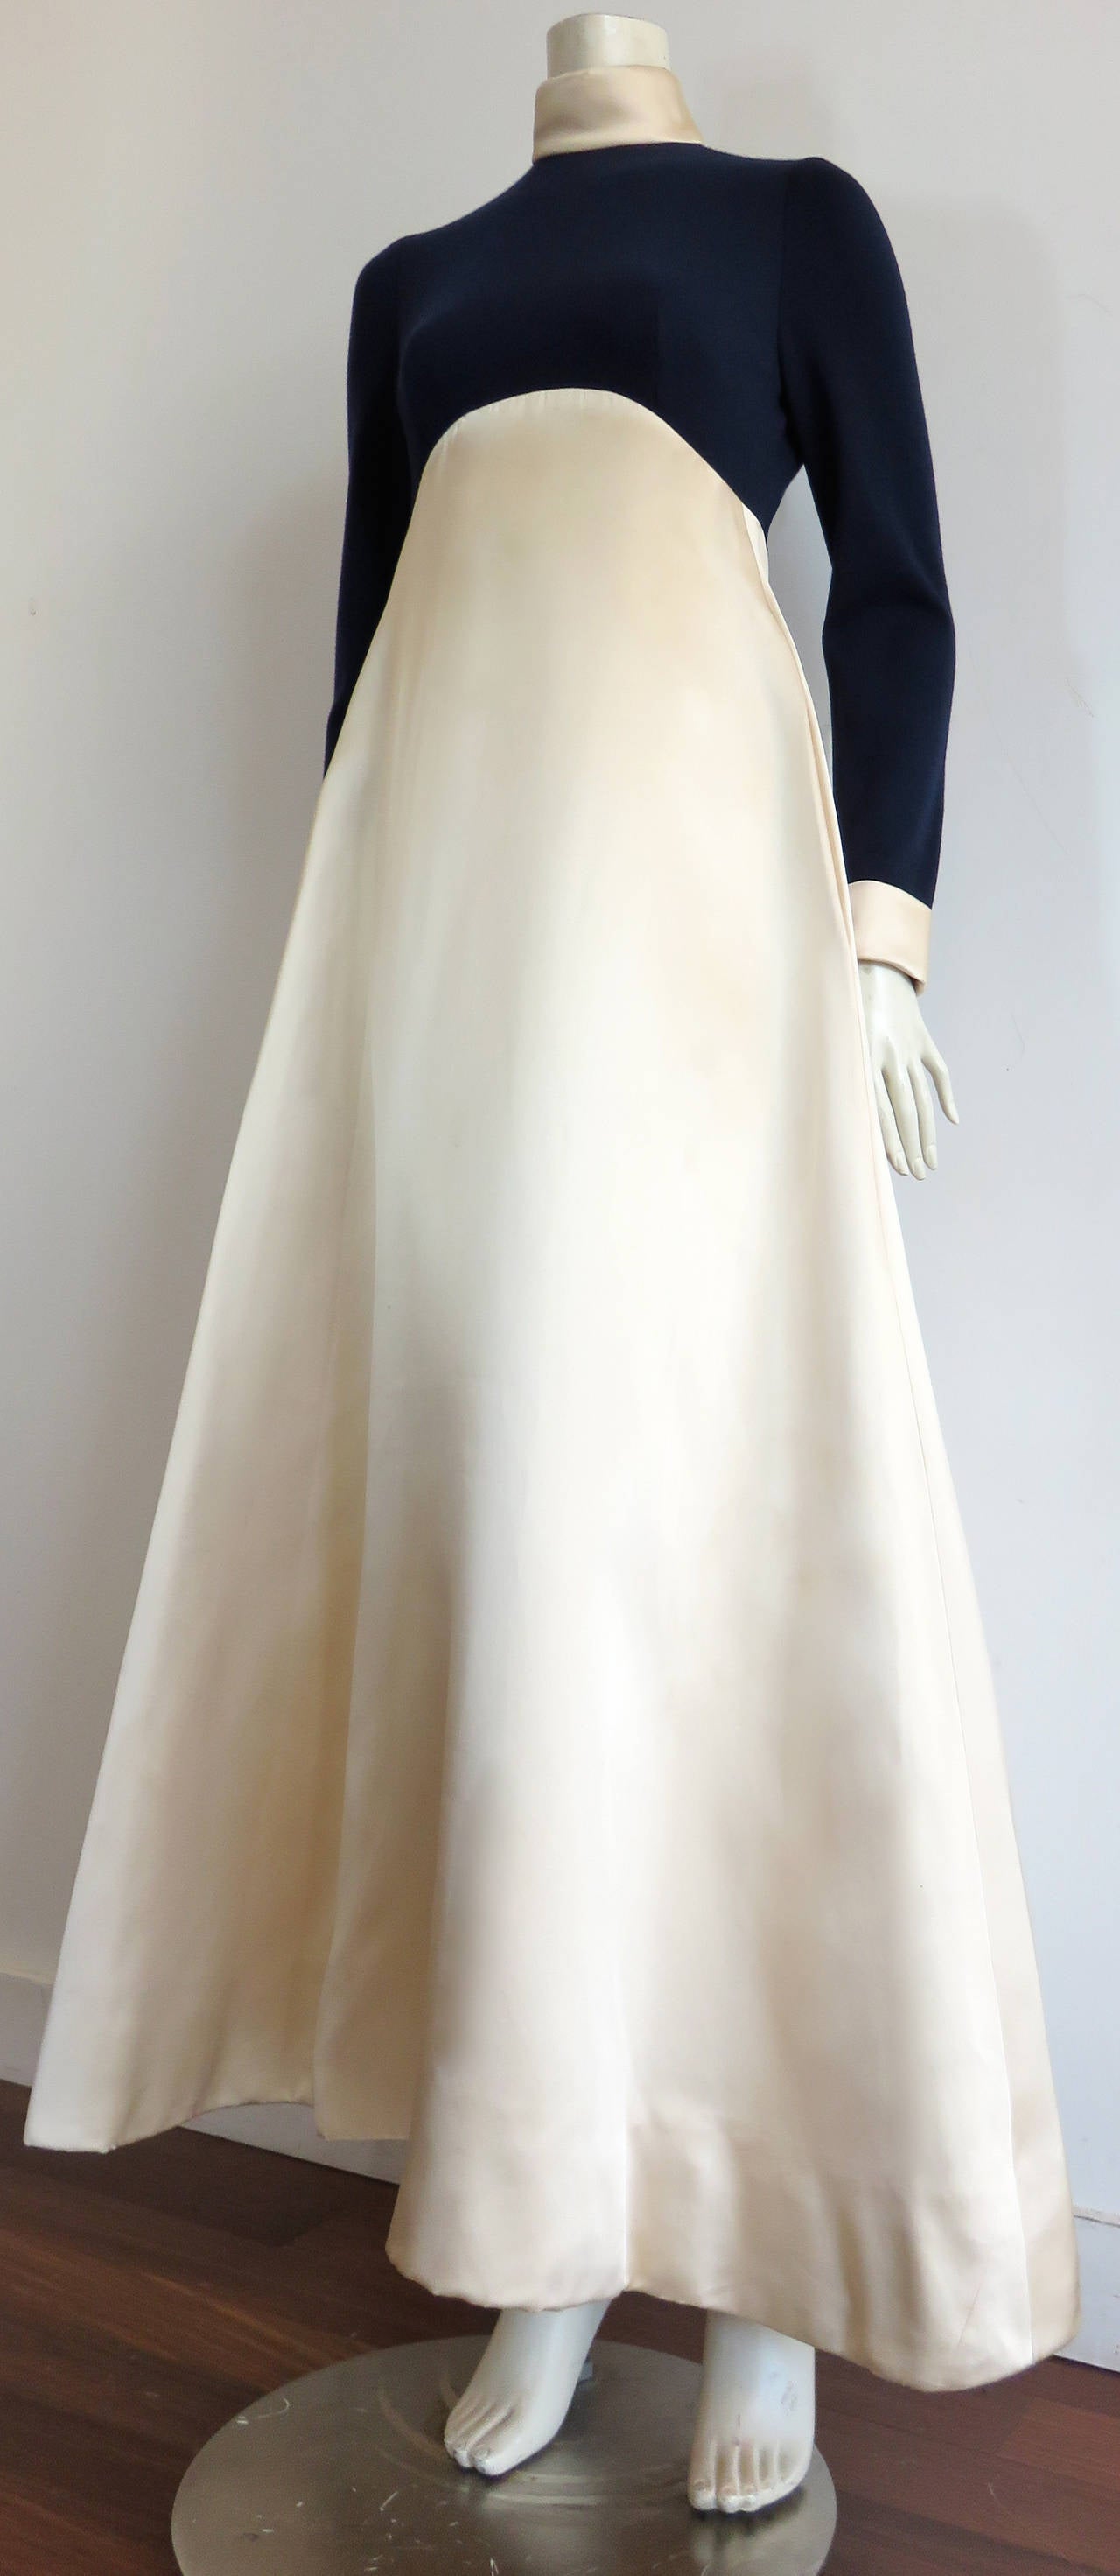 1960's GEOFFREY BEENE Satin & jersey evening gown dress.

This stunning evening dress was designed by Geoffrey Beene during the 1960's in New York, and was originally purchased at the Millie D. Oppenheimer boutique in Chicago, once located at the